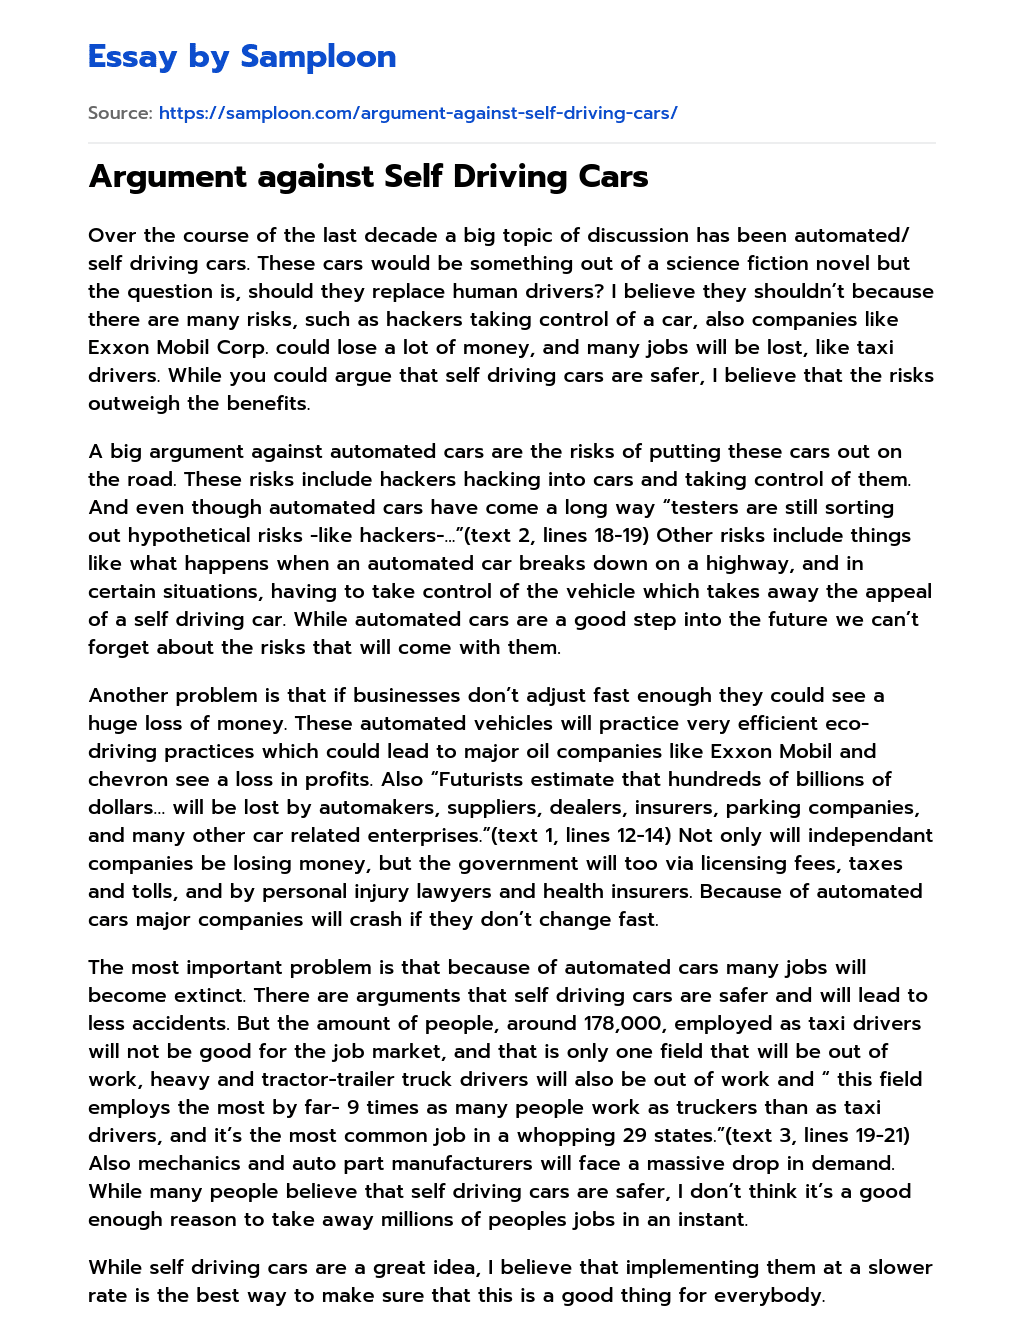 argumentative essay about self driving cars